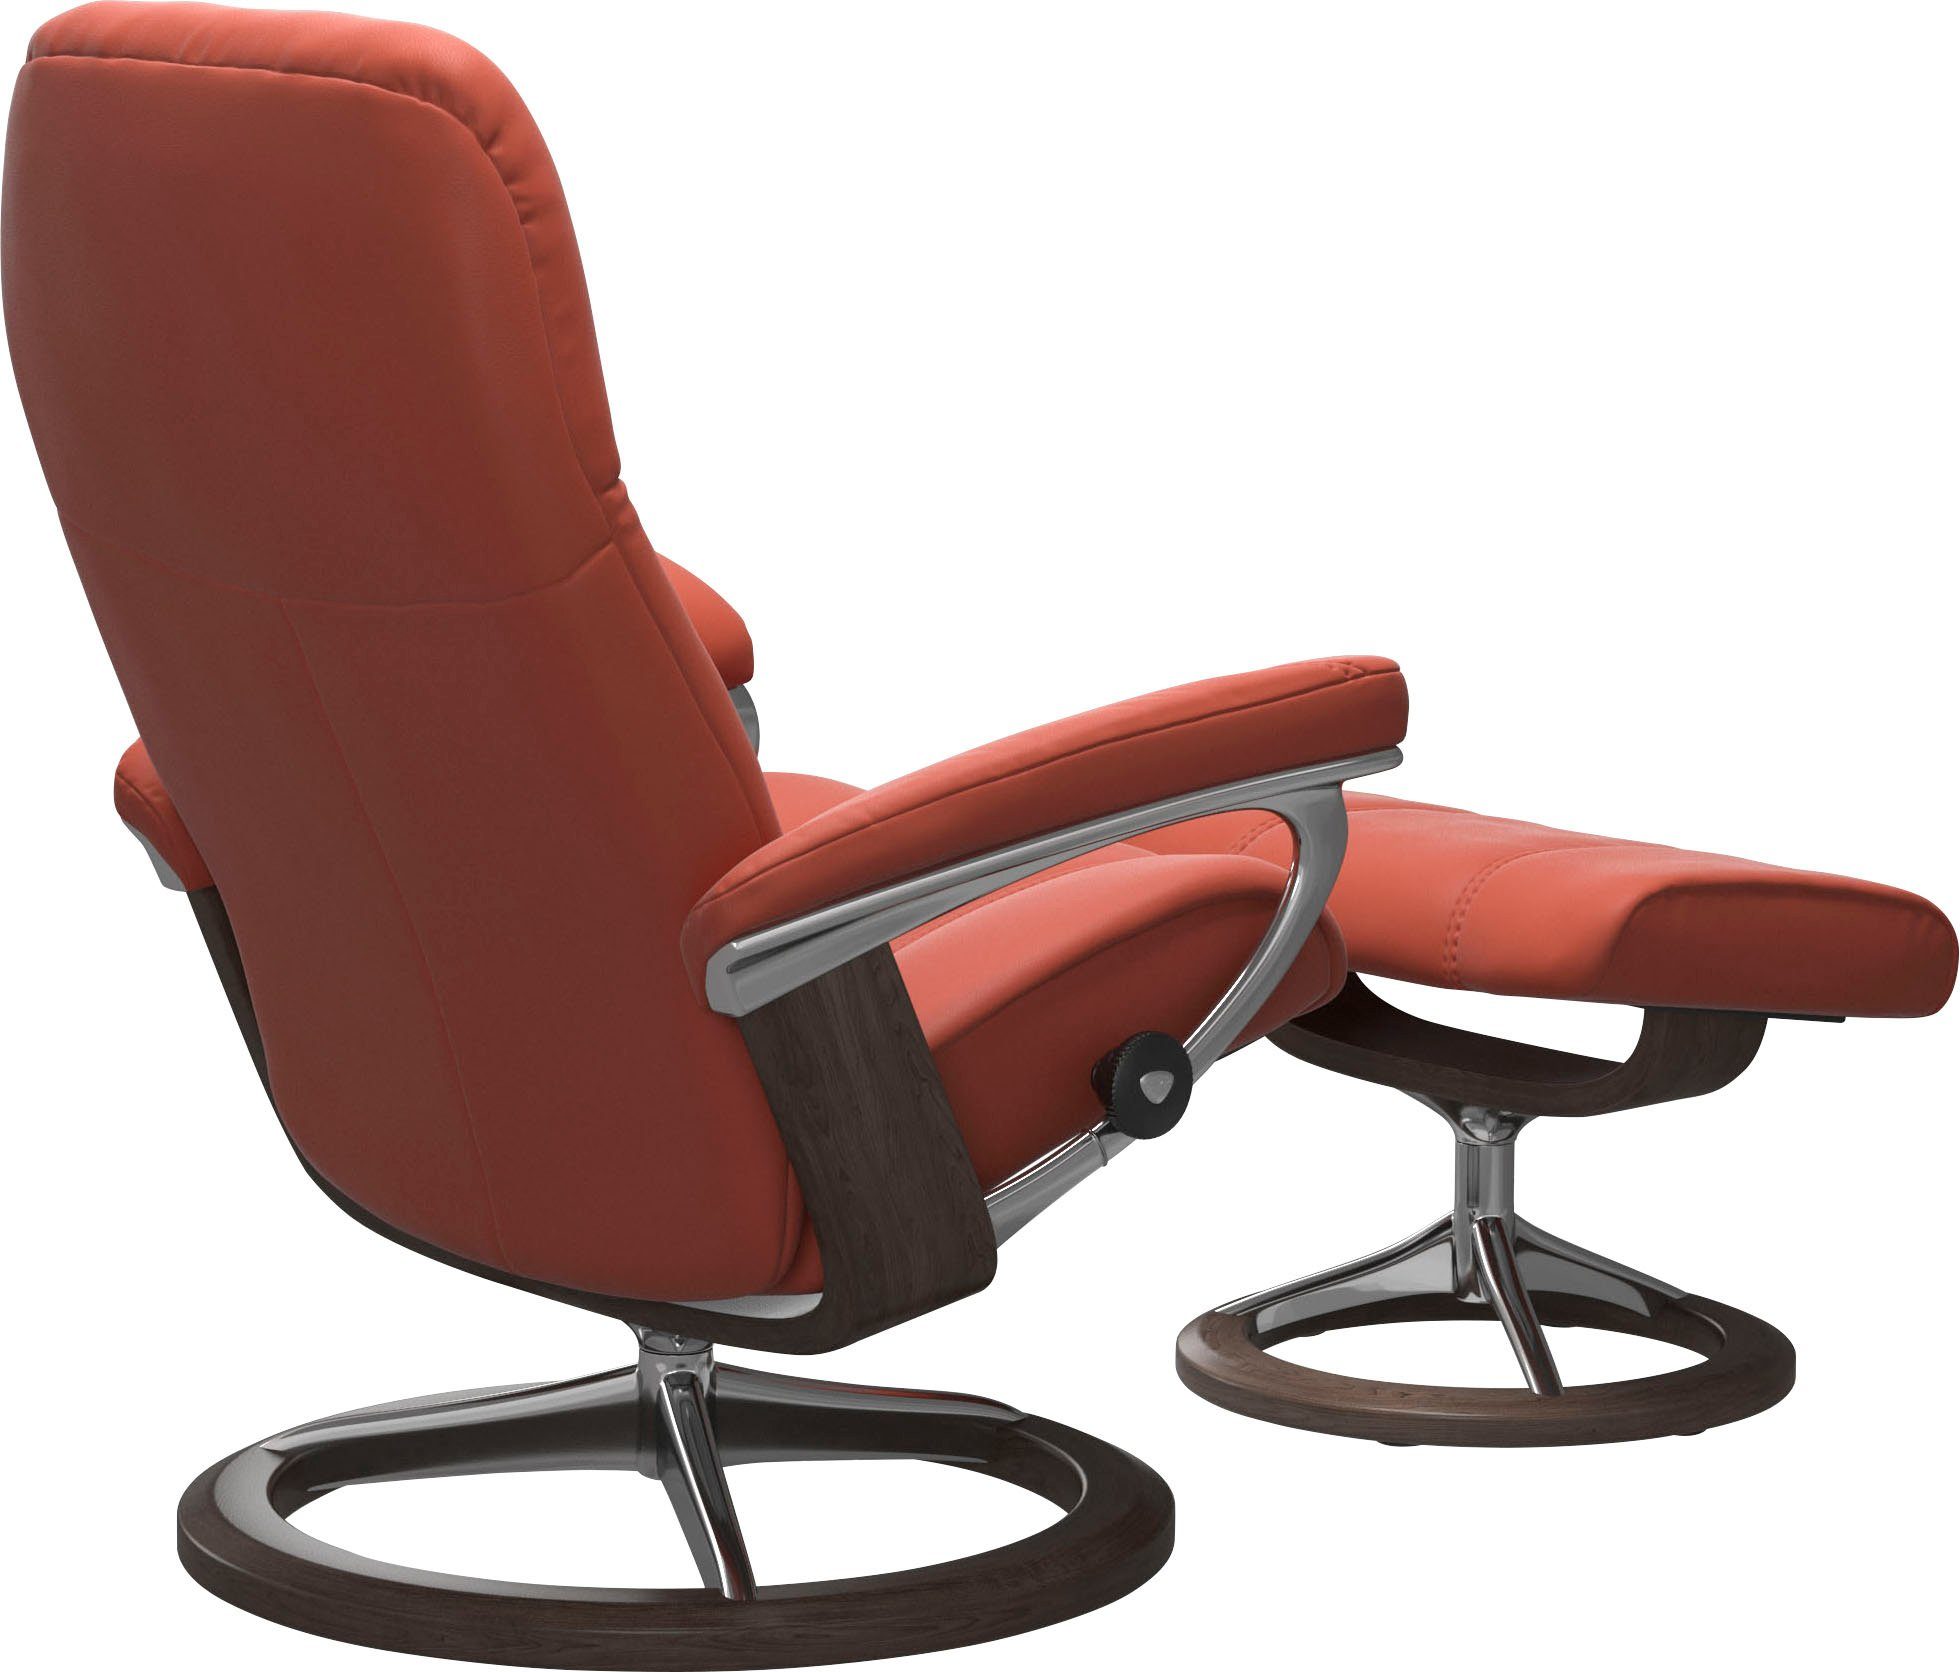 Stressless® S, Wenge Relaxsessel Signature Größe Base, Consul, Gestell mit